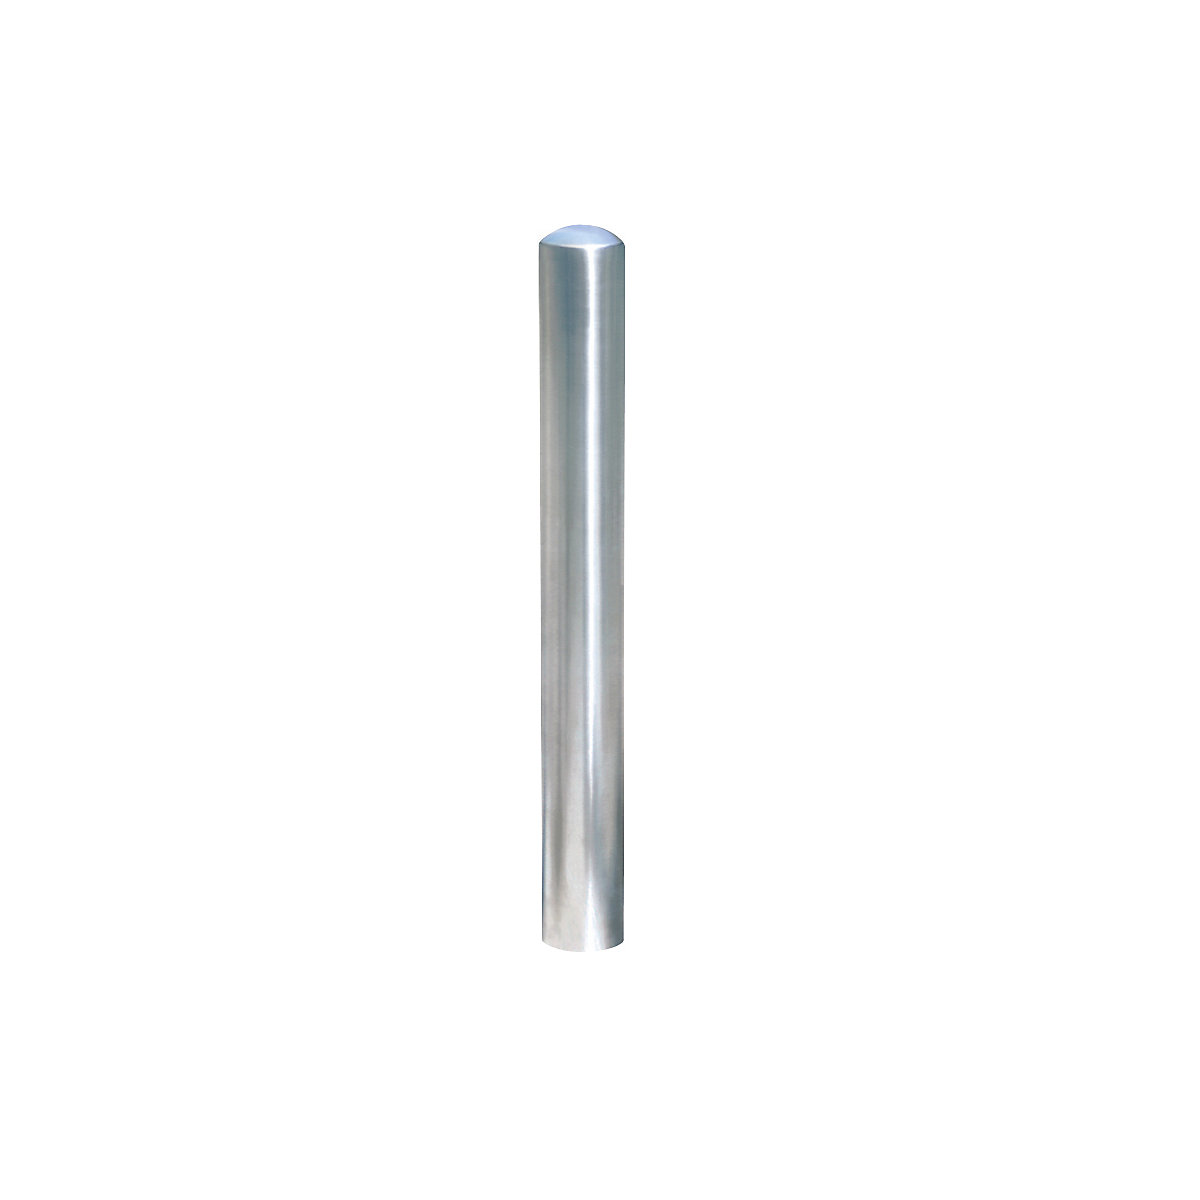 Stainless steel bollard, for bolting in place, Ø 76 mm-6